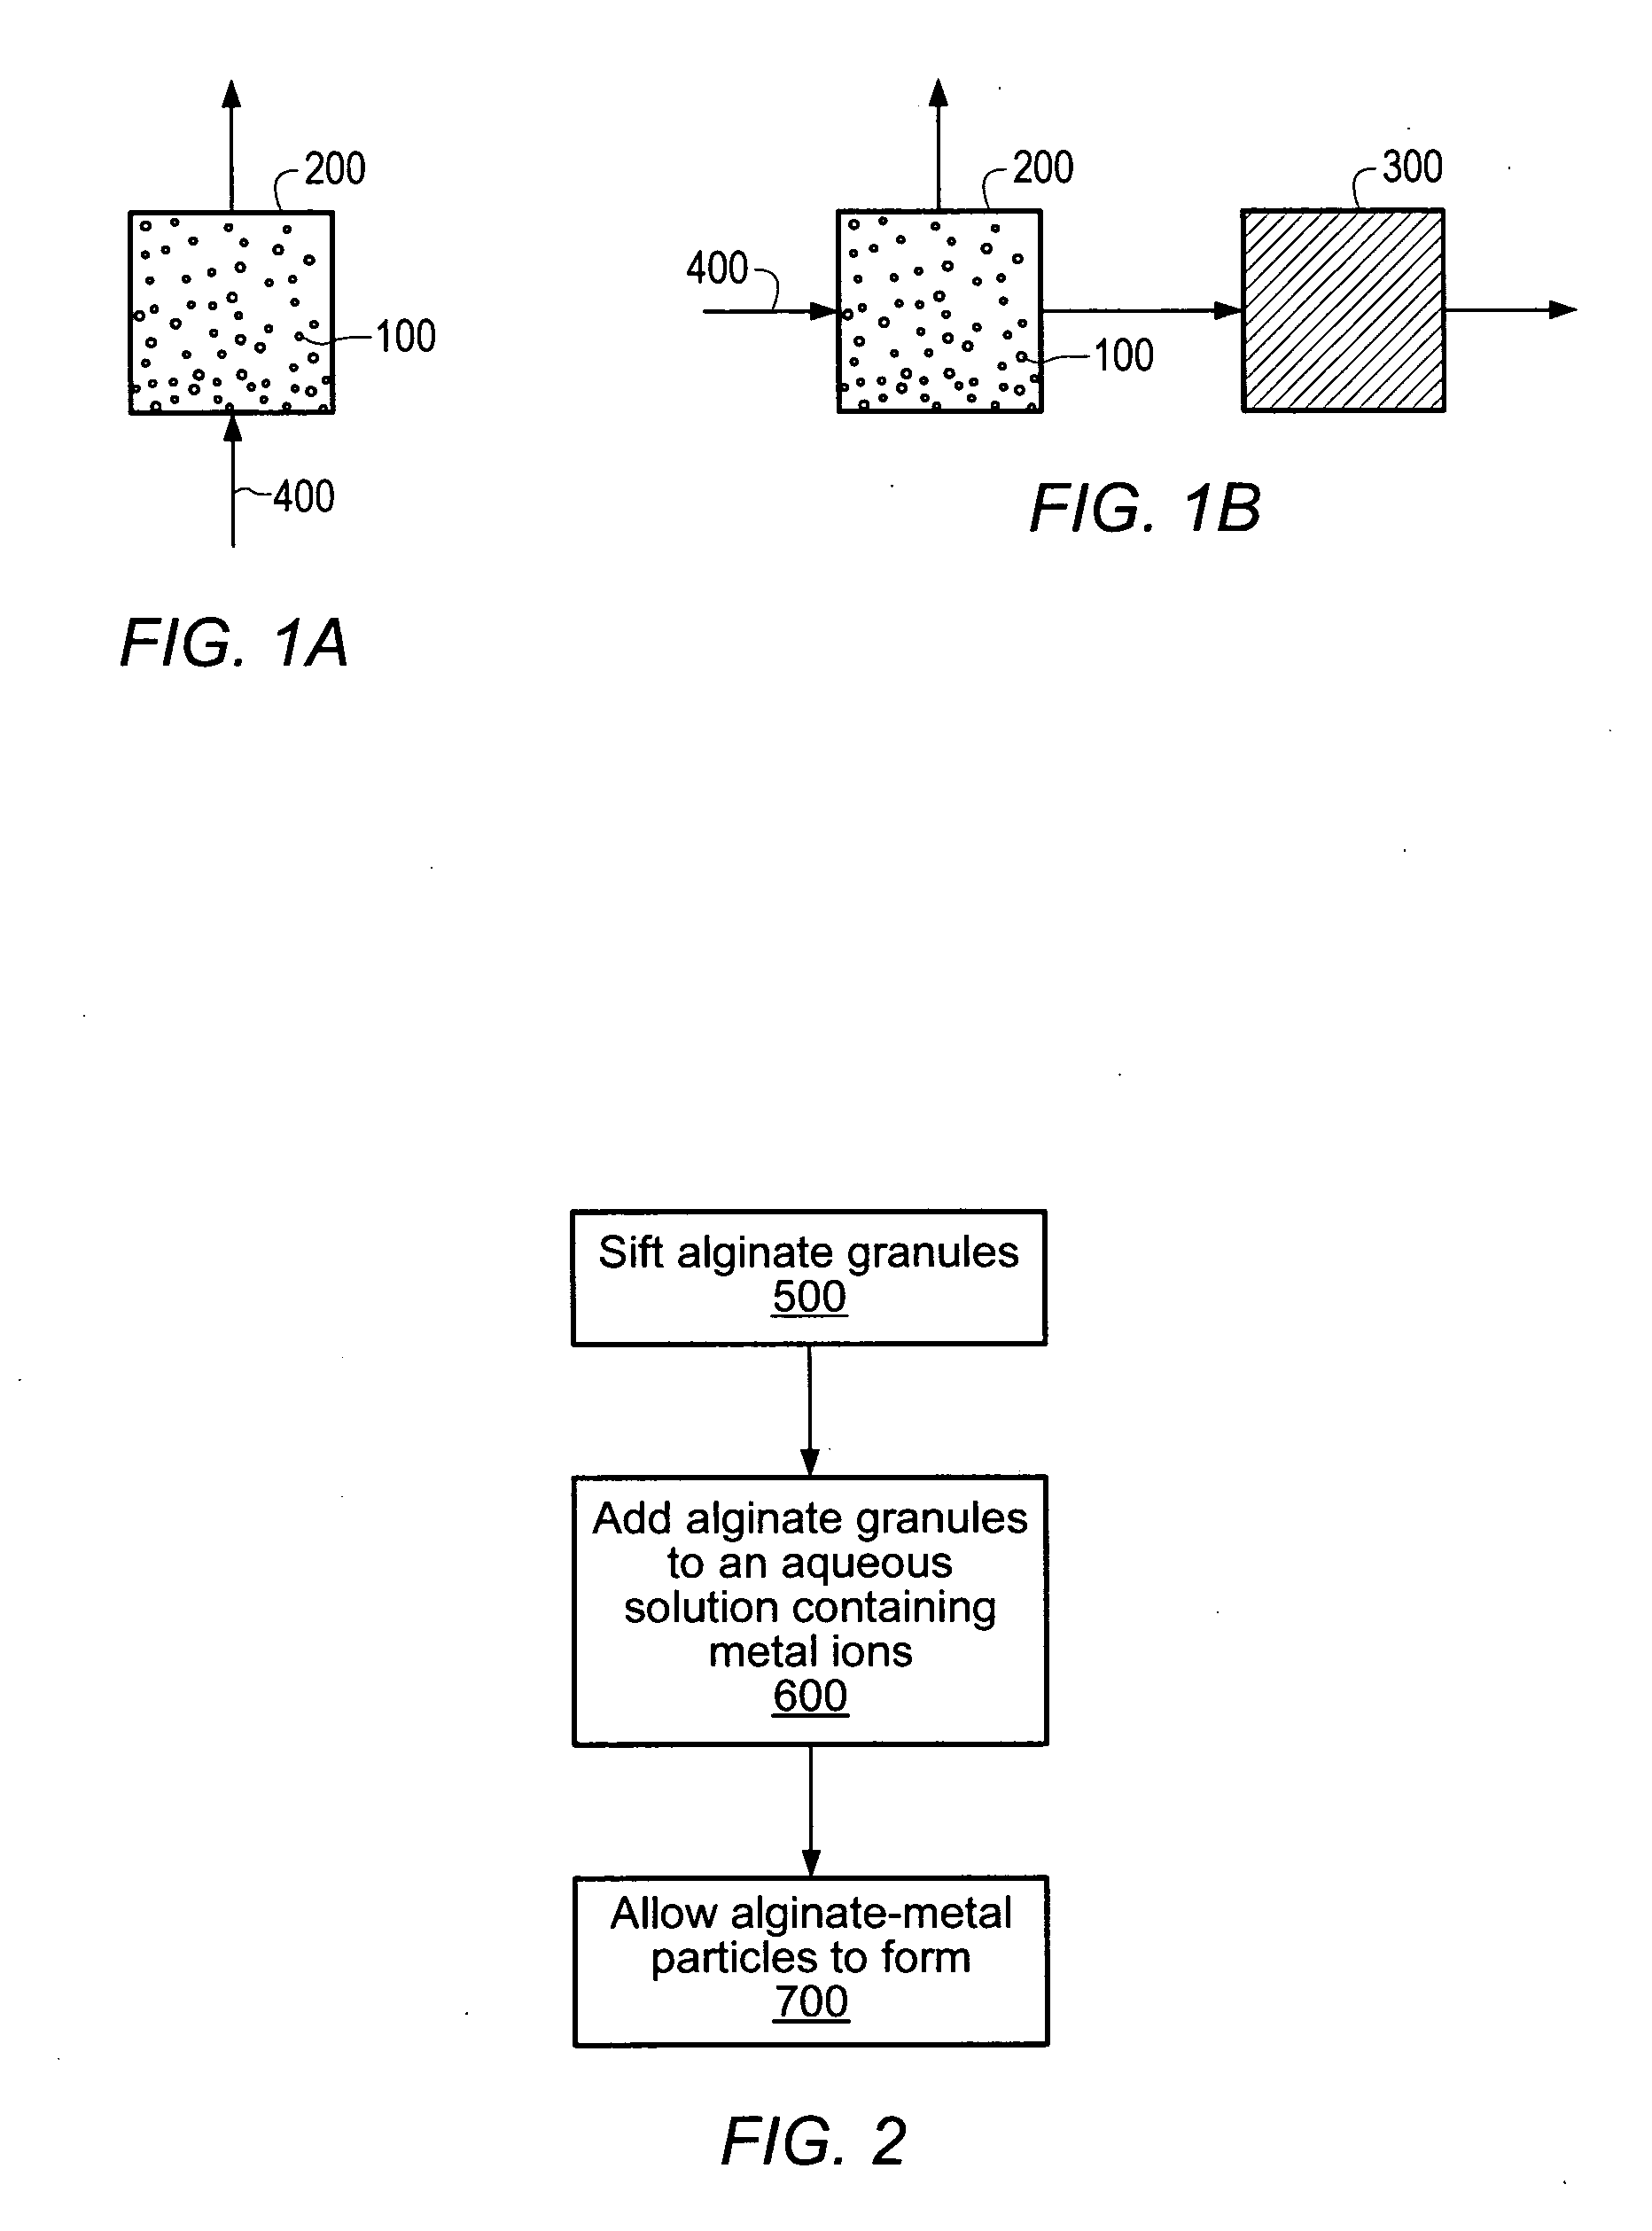 Systems and methods of reducing metal compounds from fluids using alginate beads